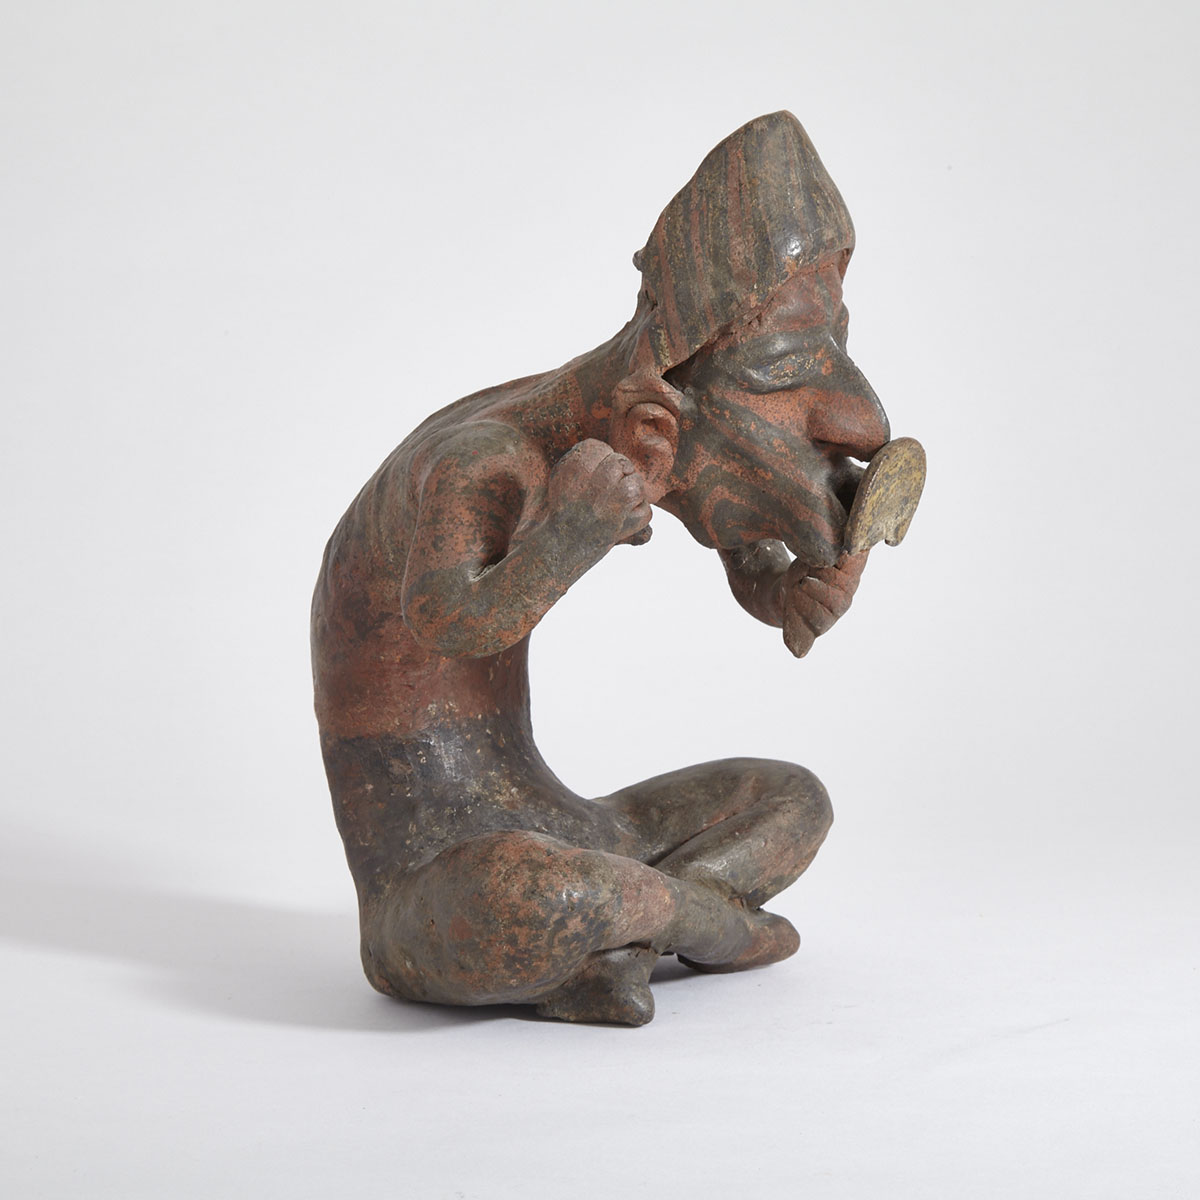 Nayarit Pottery Figure of a Diseased Male, Proto-Classic Period, 100 B.C. - 250 A.D.